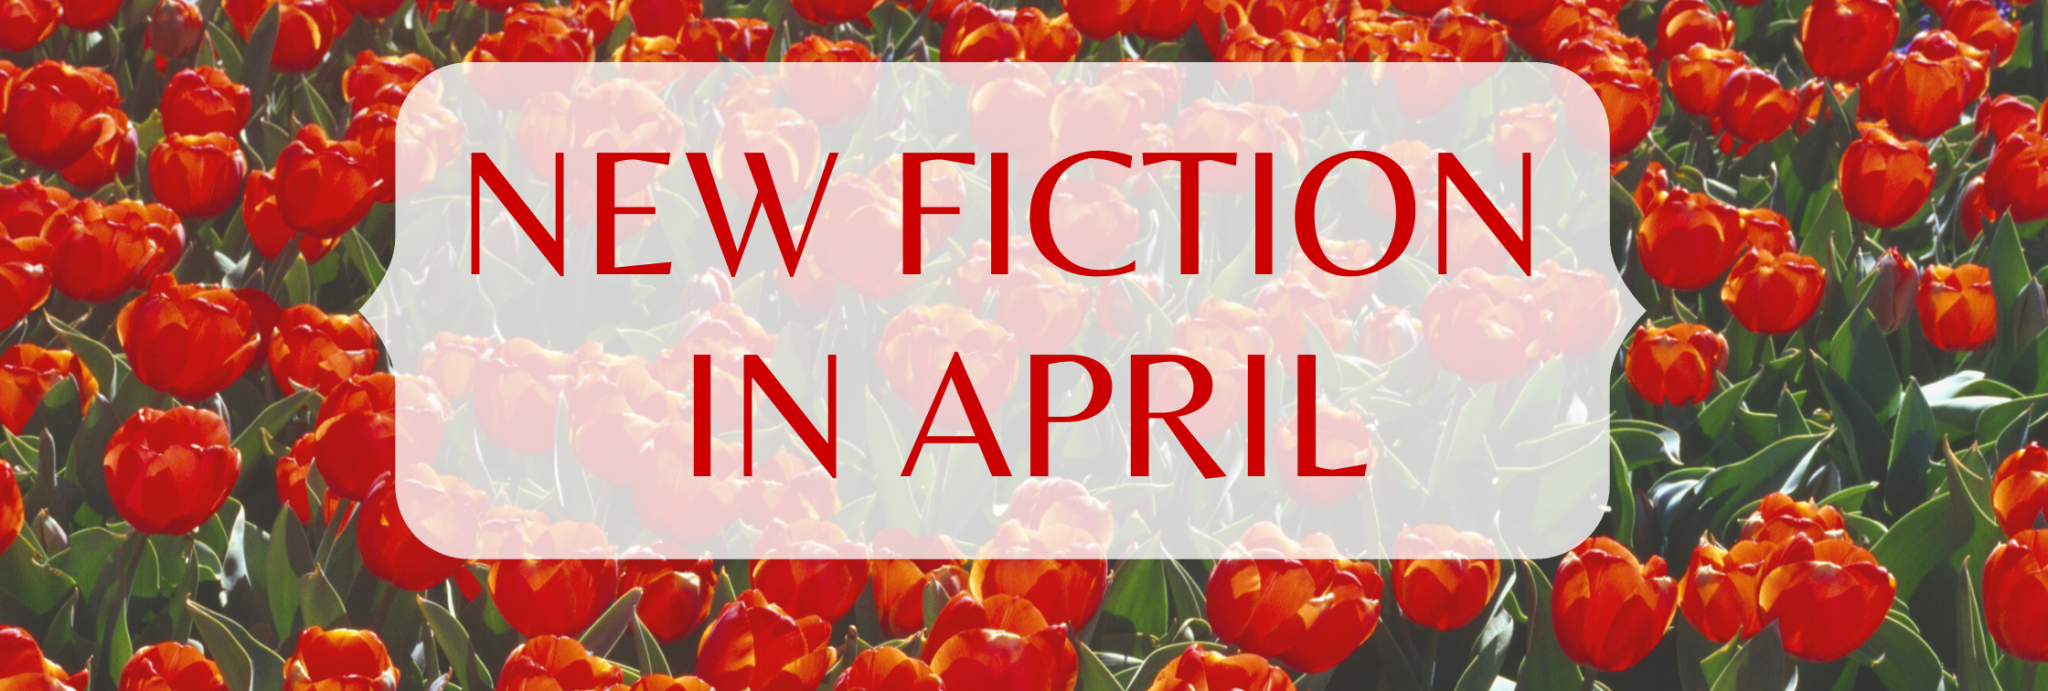 New Fiction in April